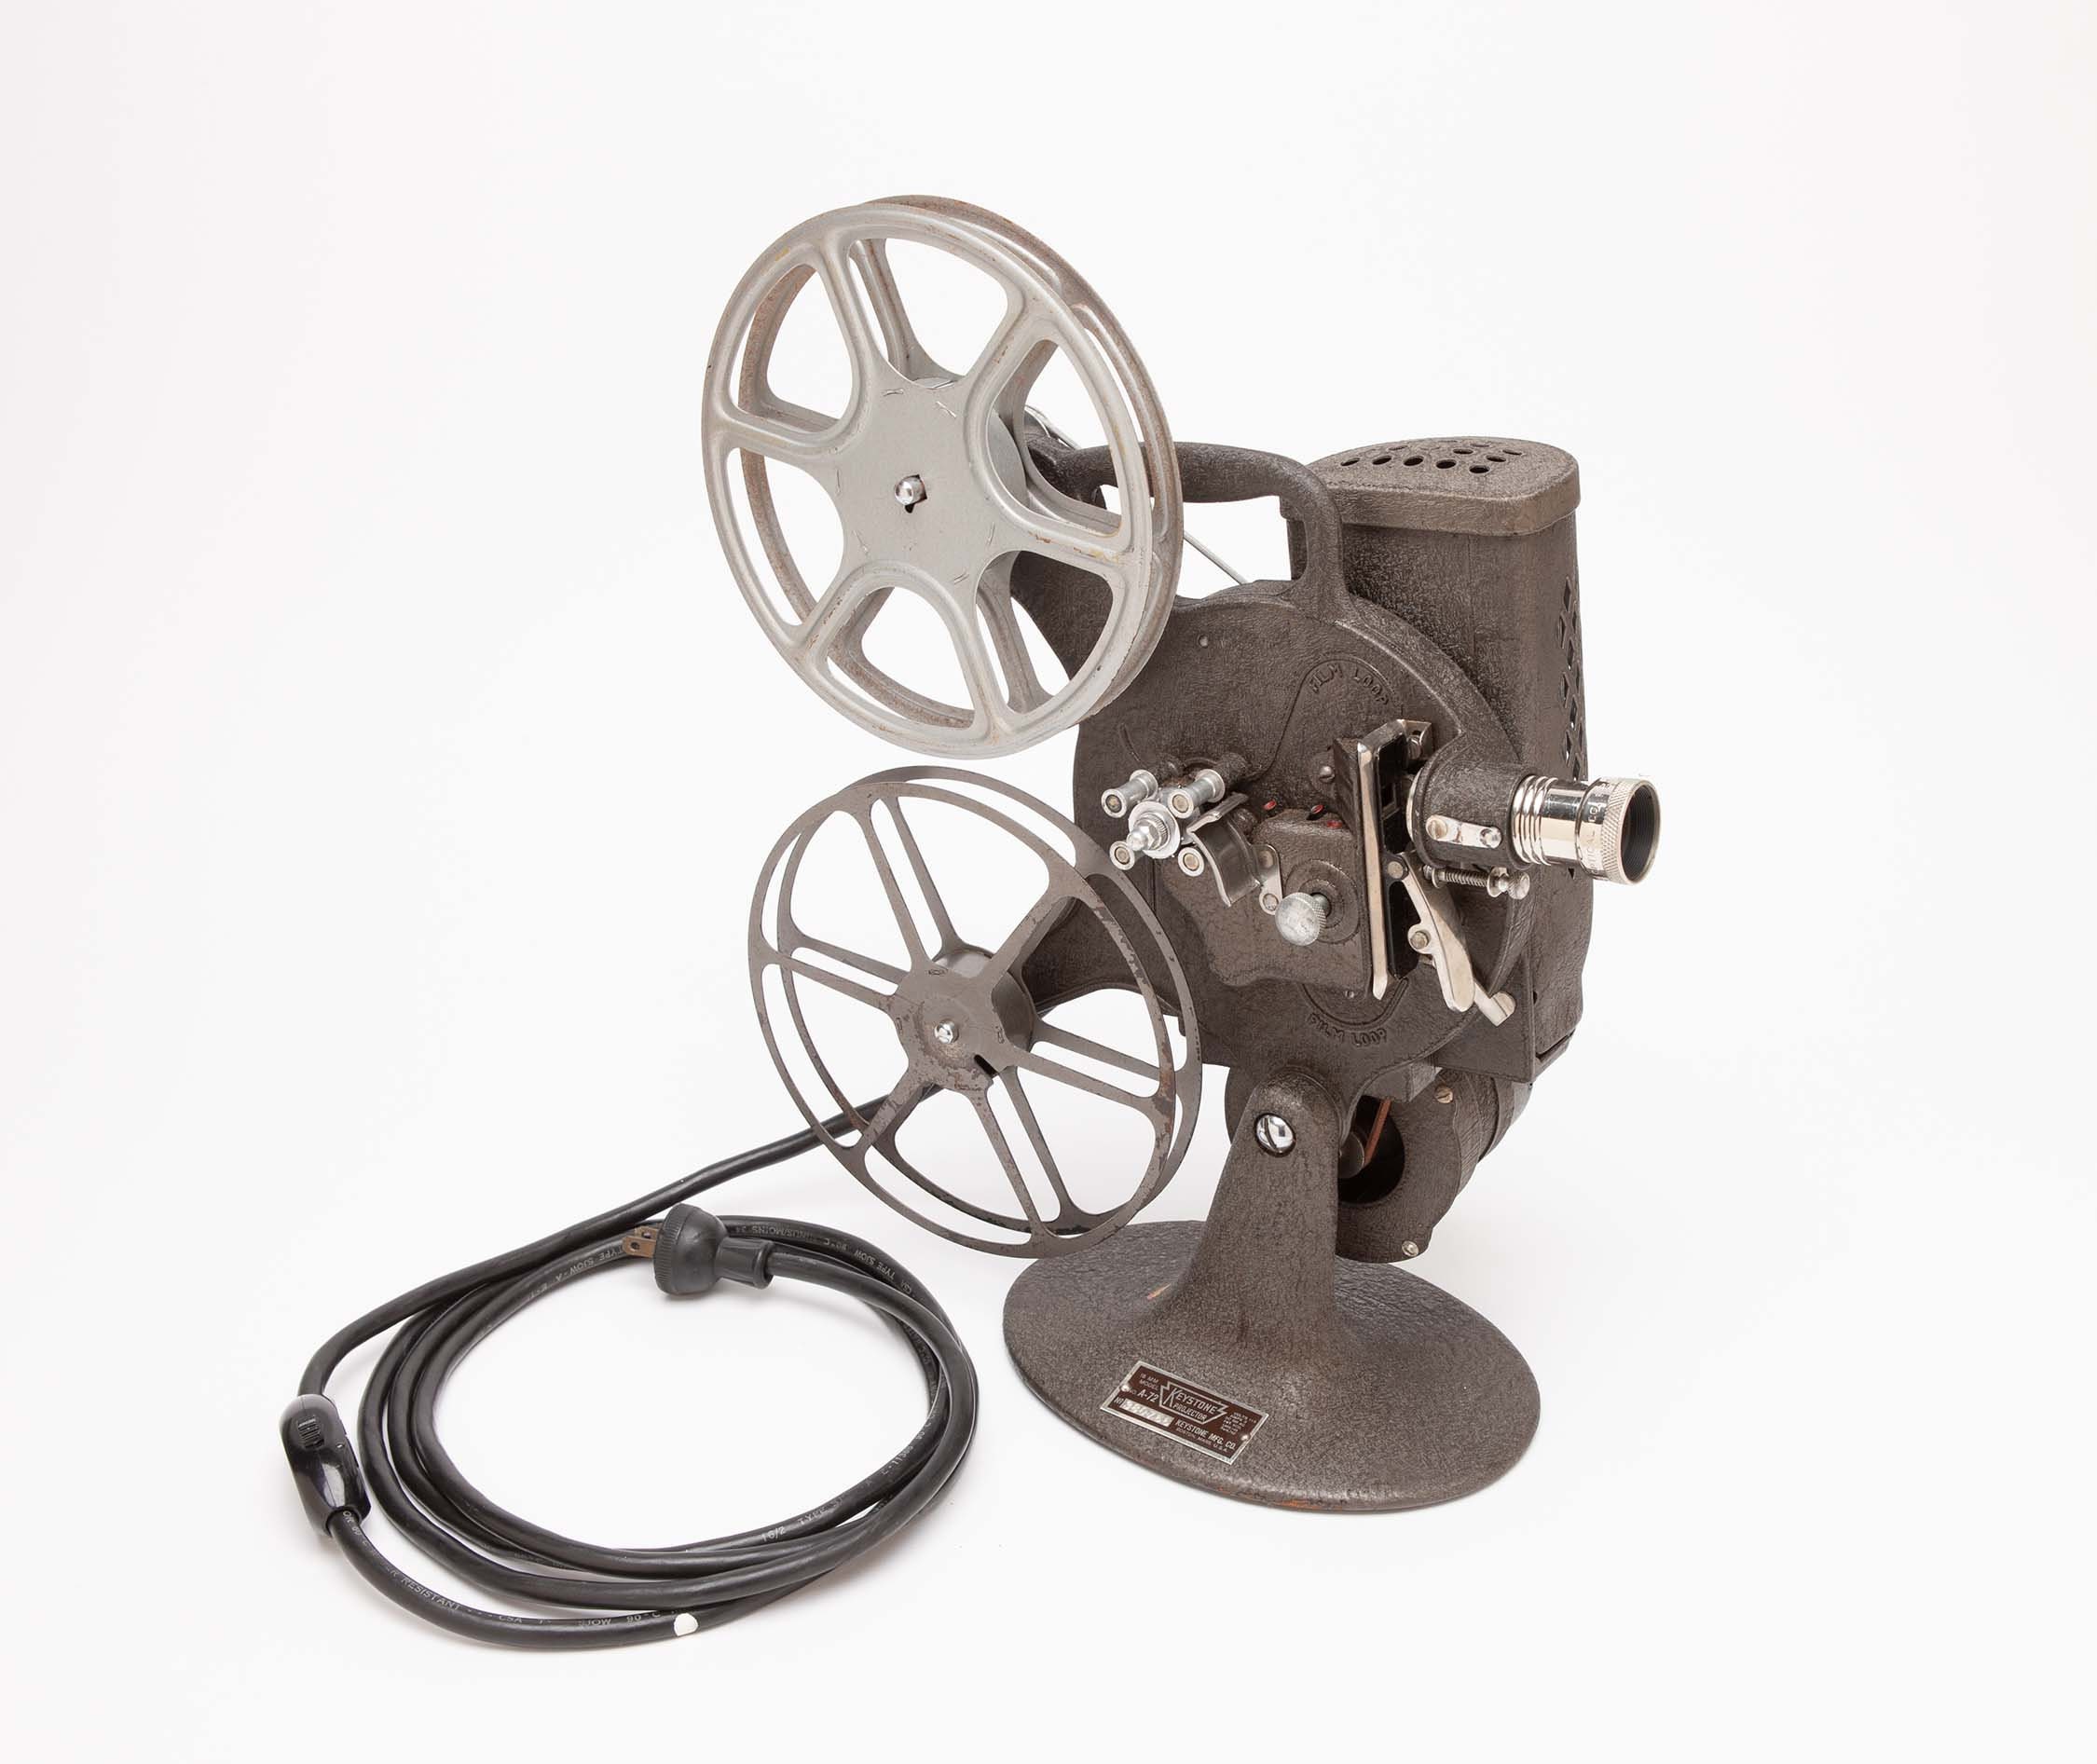 KEYSTONE A72 PROJECTOR 1940's 16mm Projector Mechanical Masterpiece With  Beautiful Deco Styling Working 